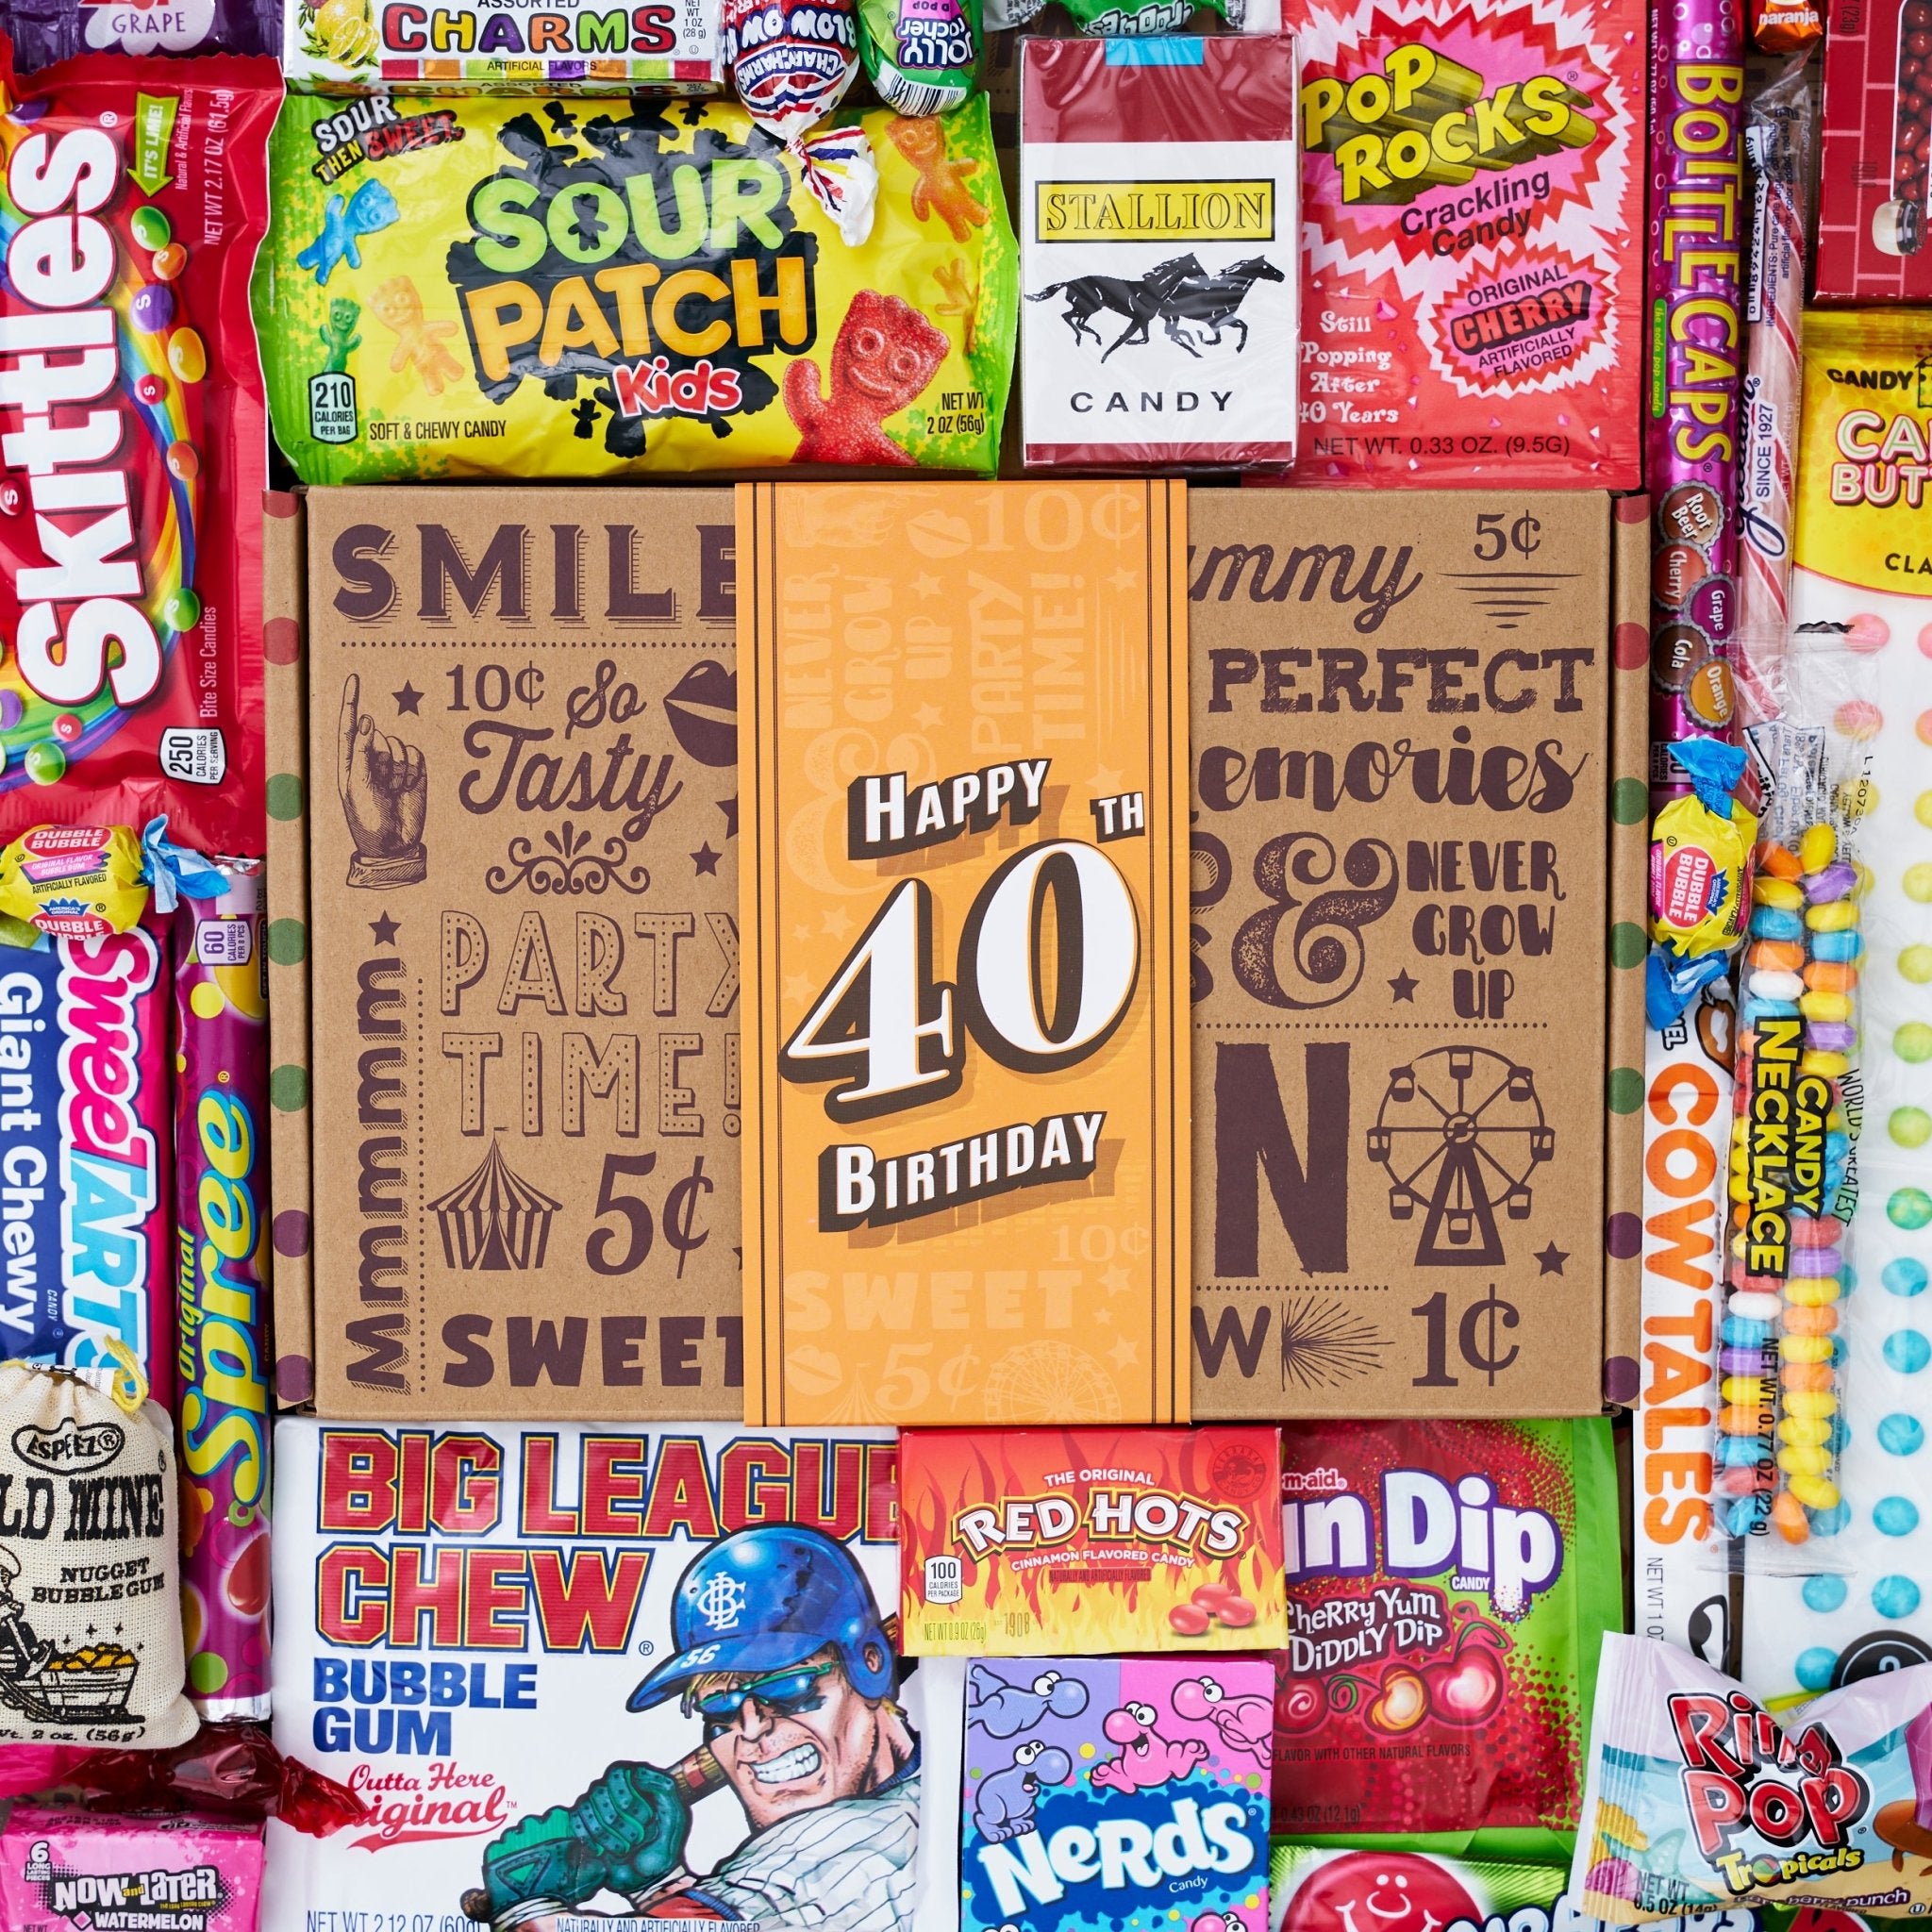 40th Birthday Retro Candy Gift - Vintage Candy Co.